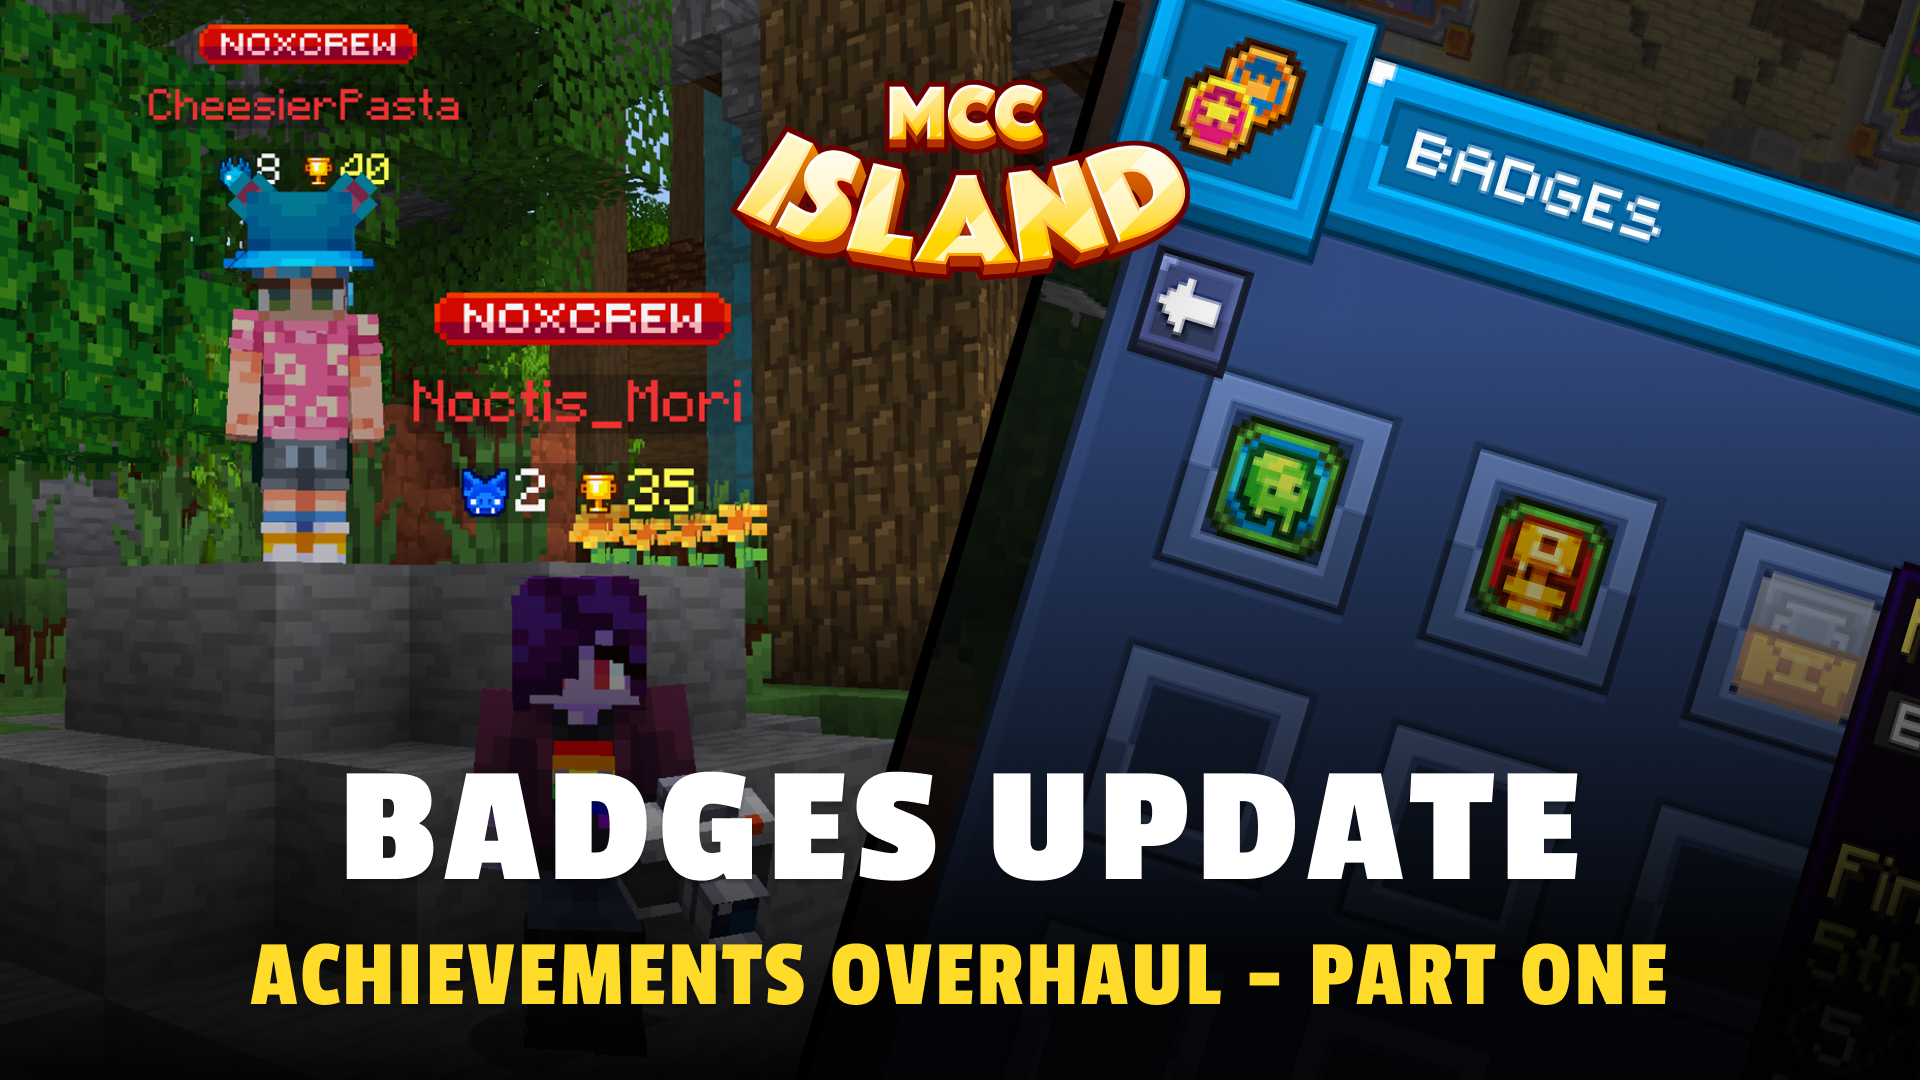 Achievements Update - First Badges Rollout!